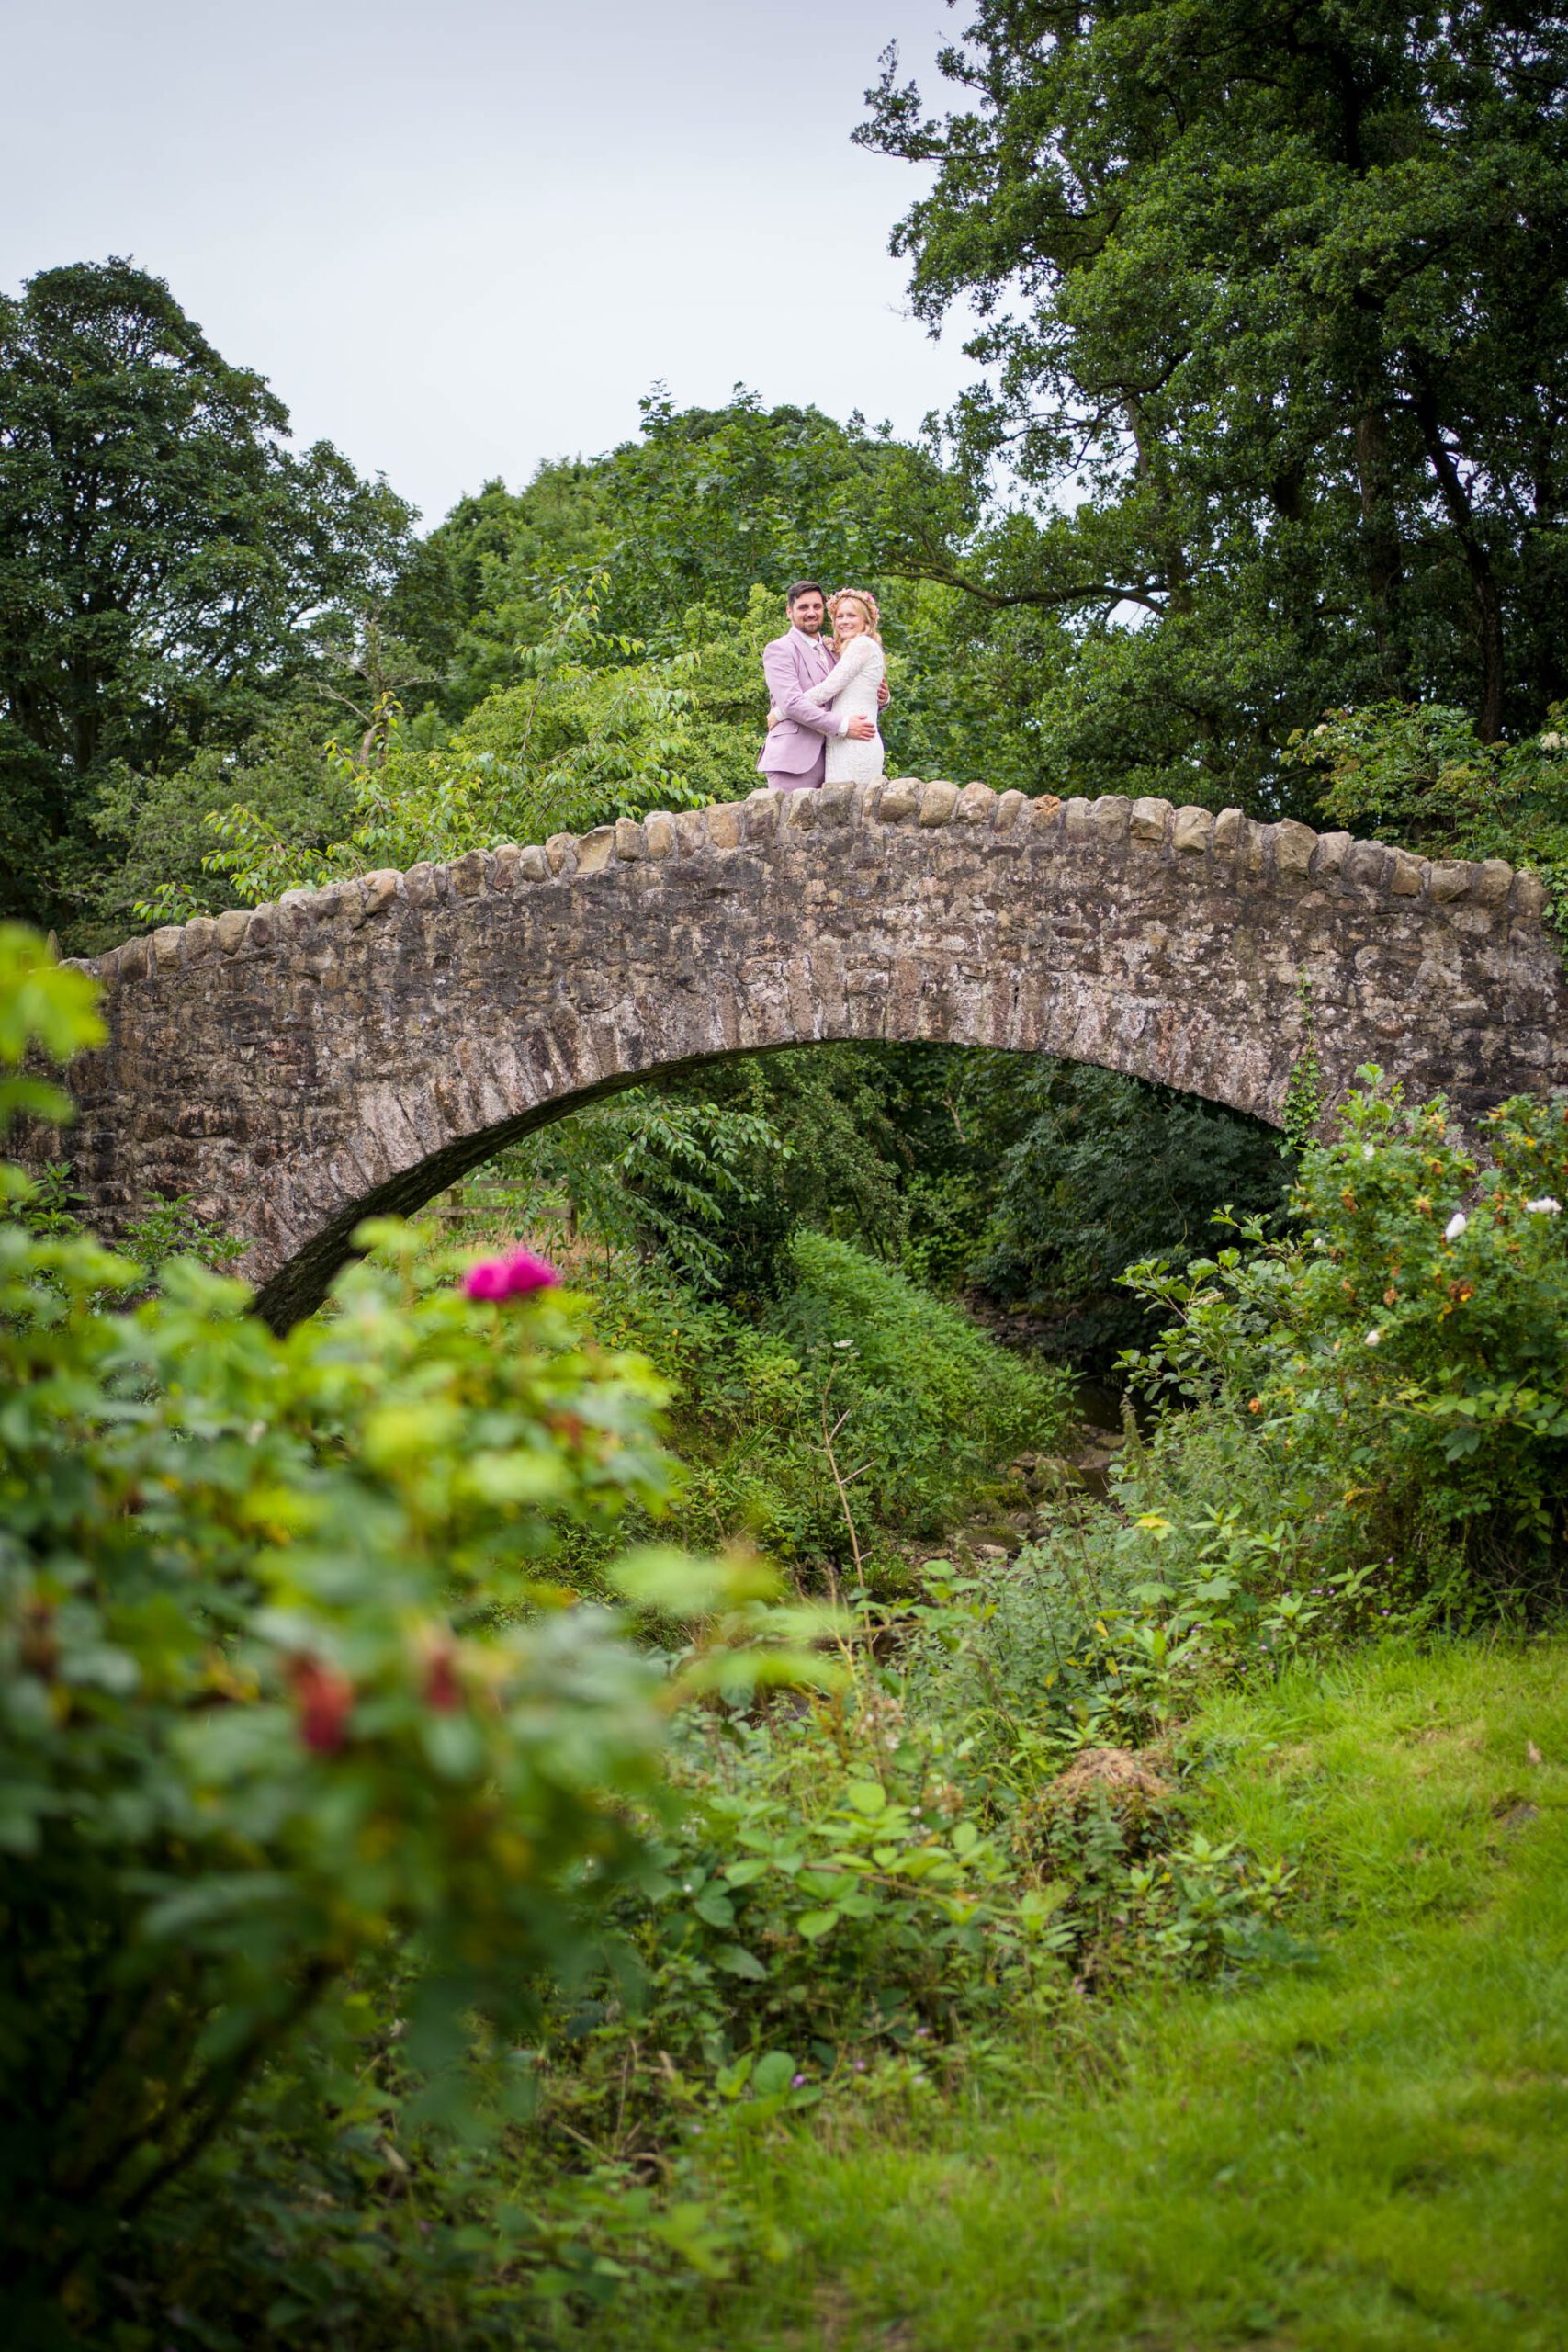 Wedding portrait at Ribble Valley wedding - bride and groom hugging while standing in centre of ancient arched stone bridge 